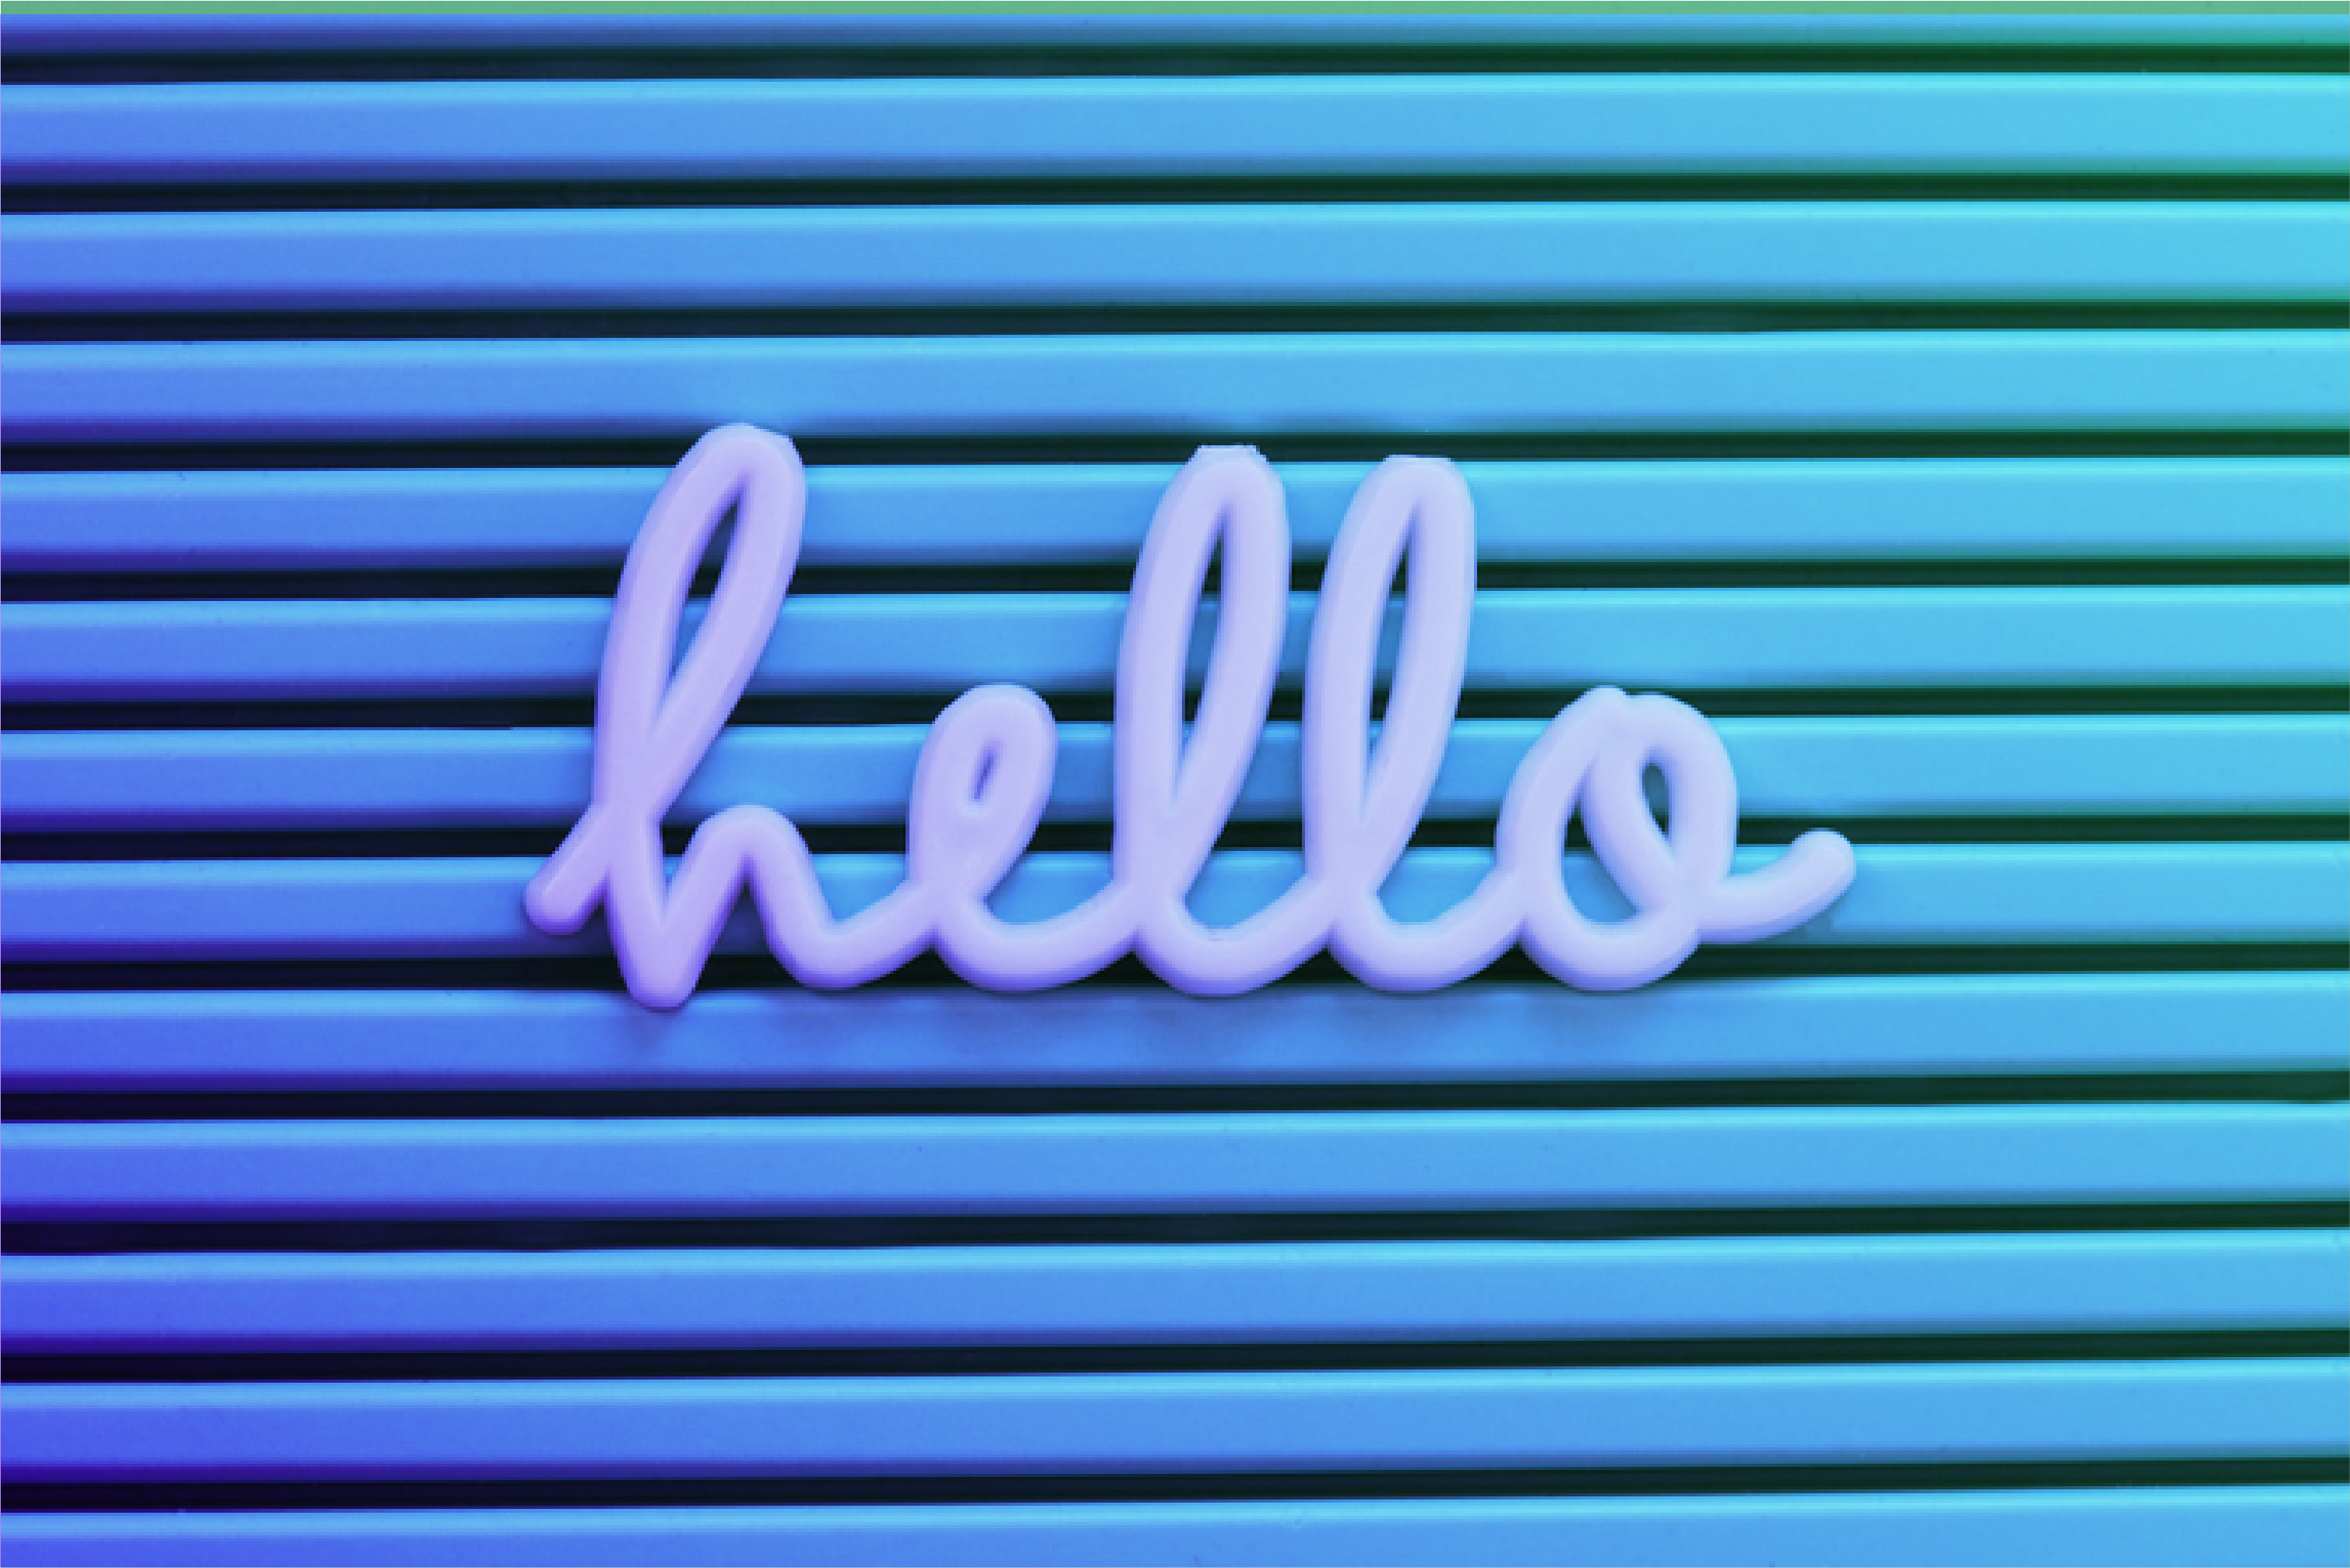 an image of hello written in lowercase scripted against a green and blue background